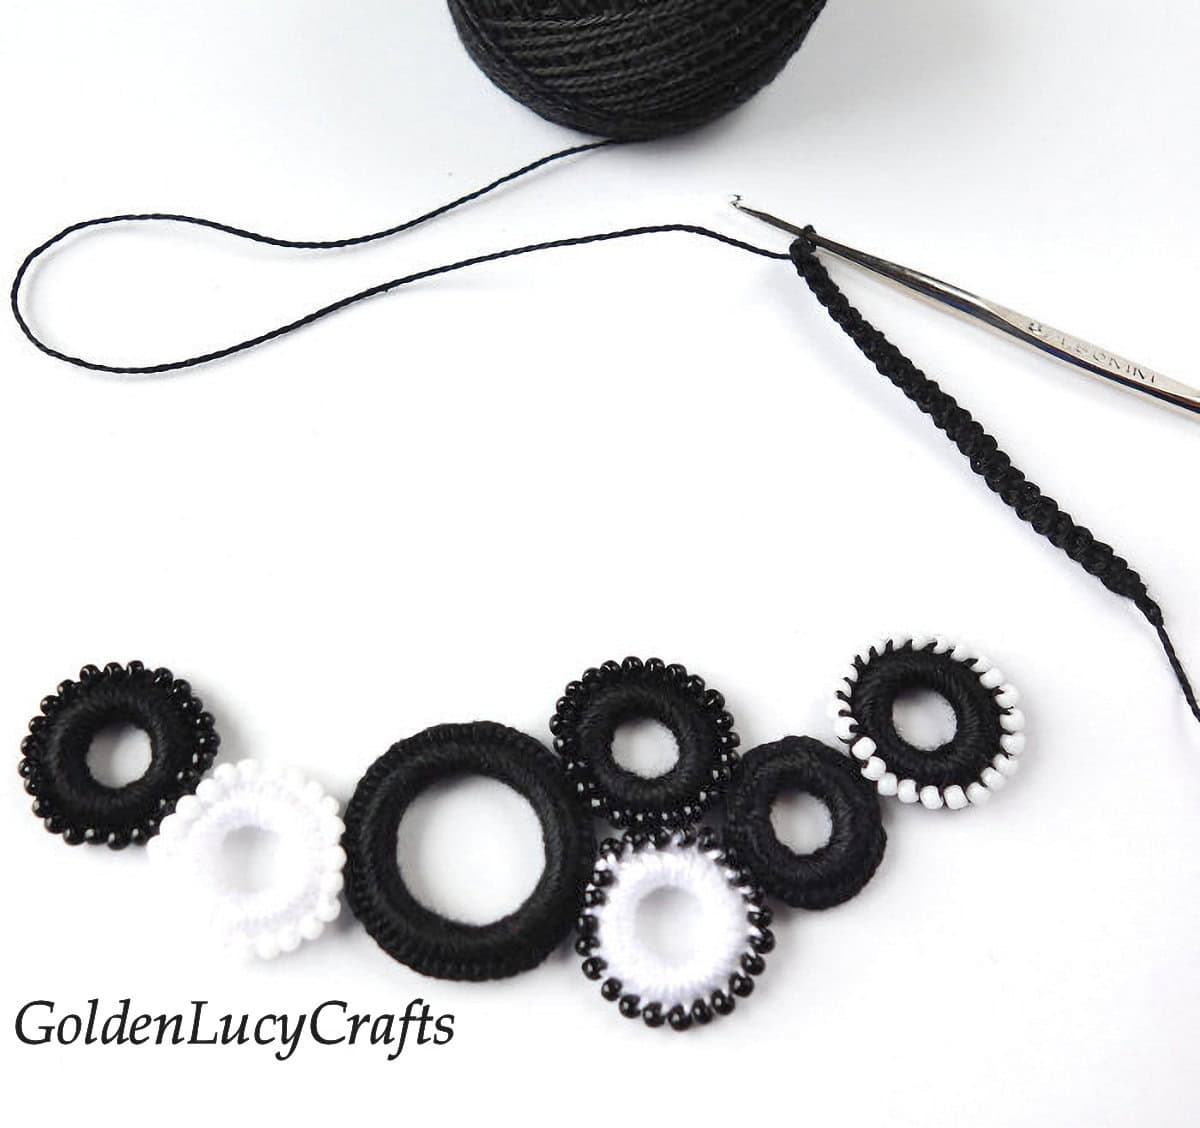 Process shot of making crocheted ring necklace.